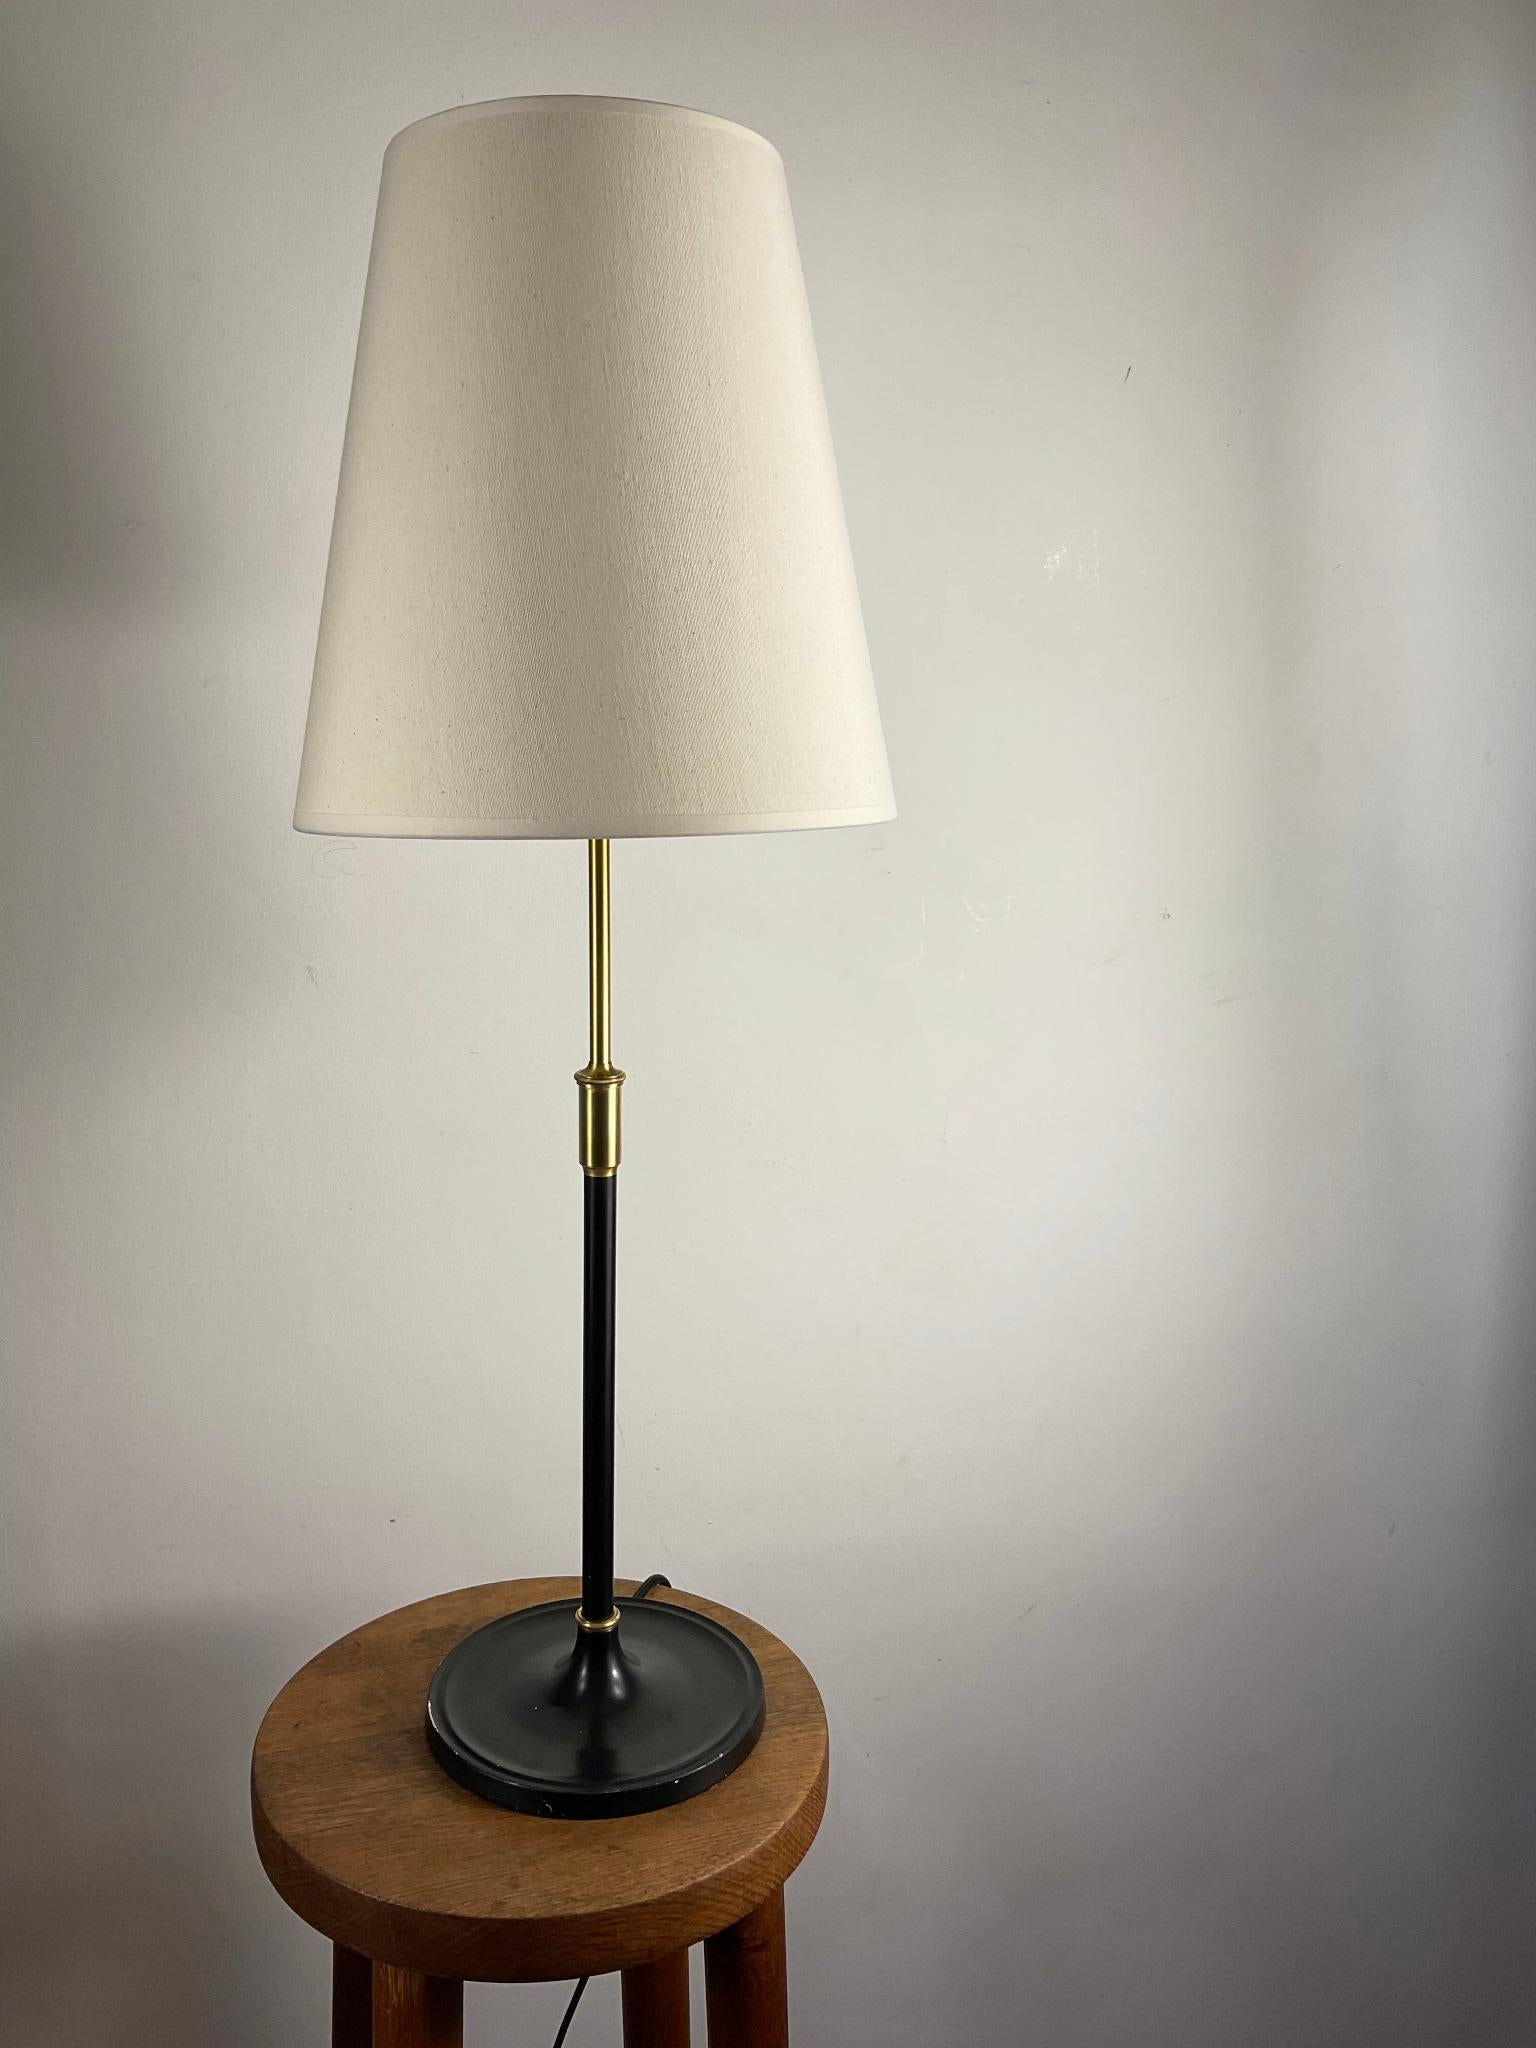 1950s Danish Table Lamp Designed by Aage Petersen Manufactured by Le Klint For Sale 5